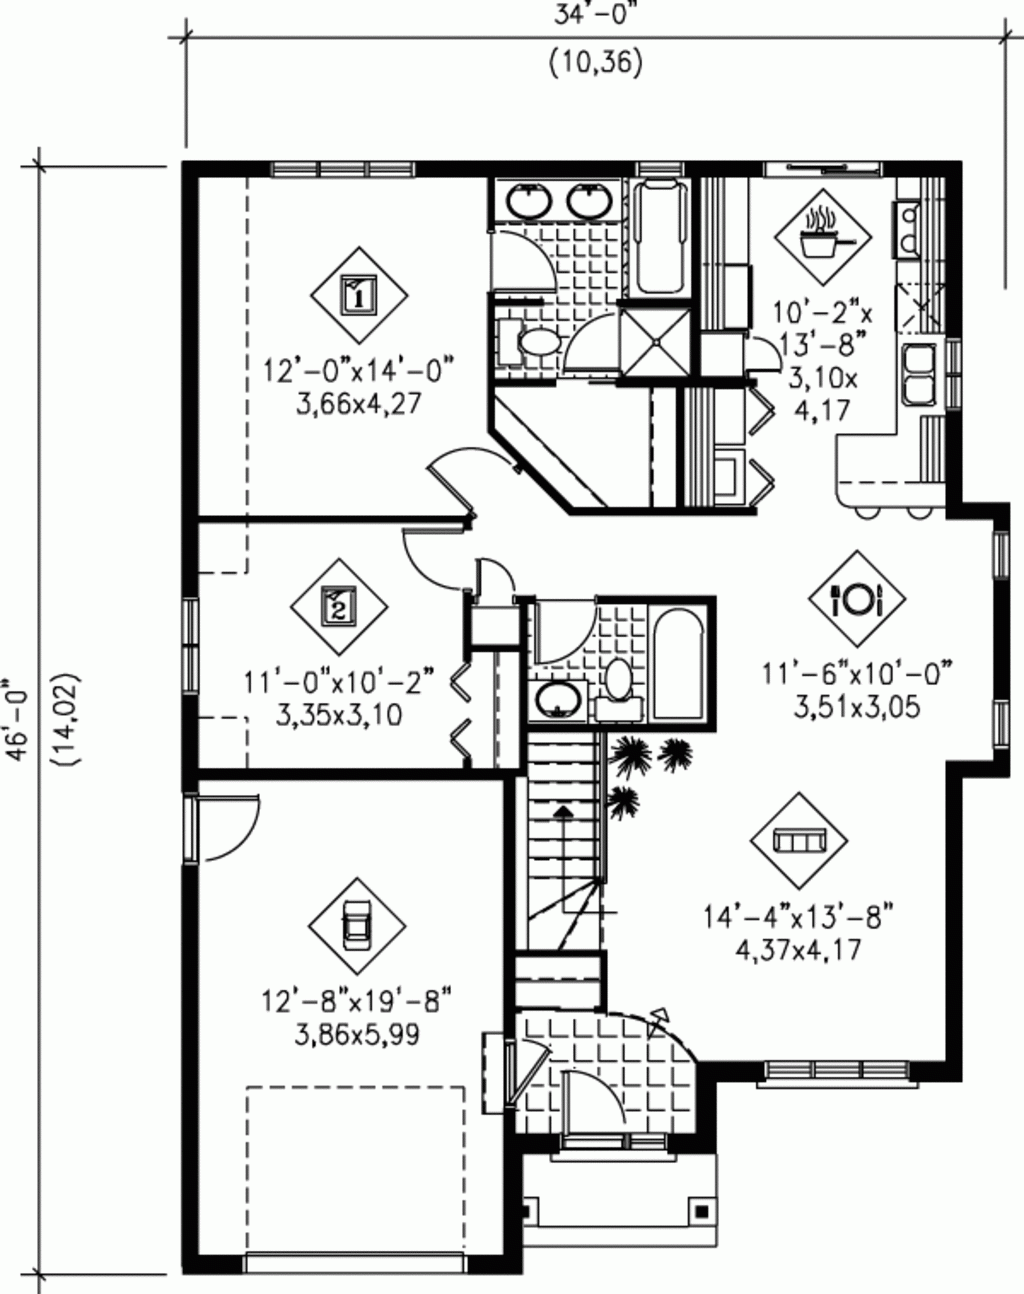 Cool Floor Plans For 1100 Sq Ft Home New Home Plans Design